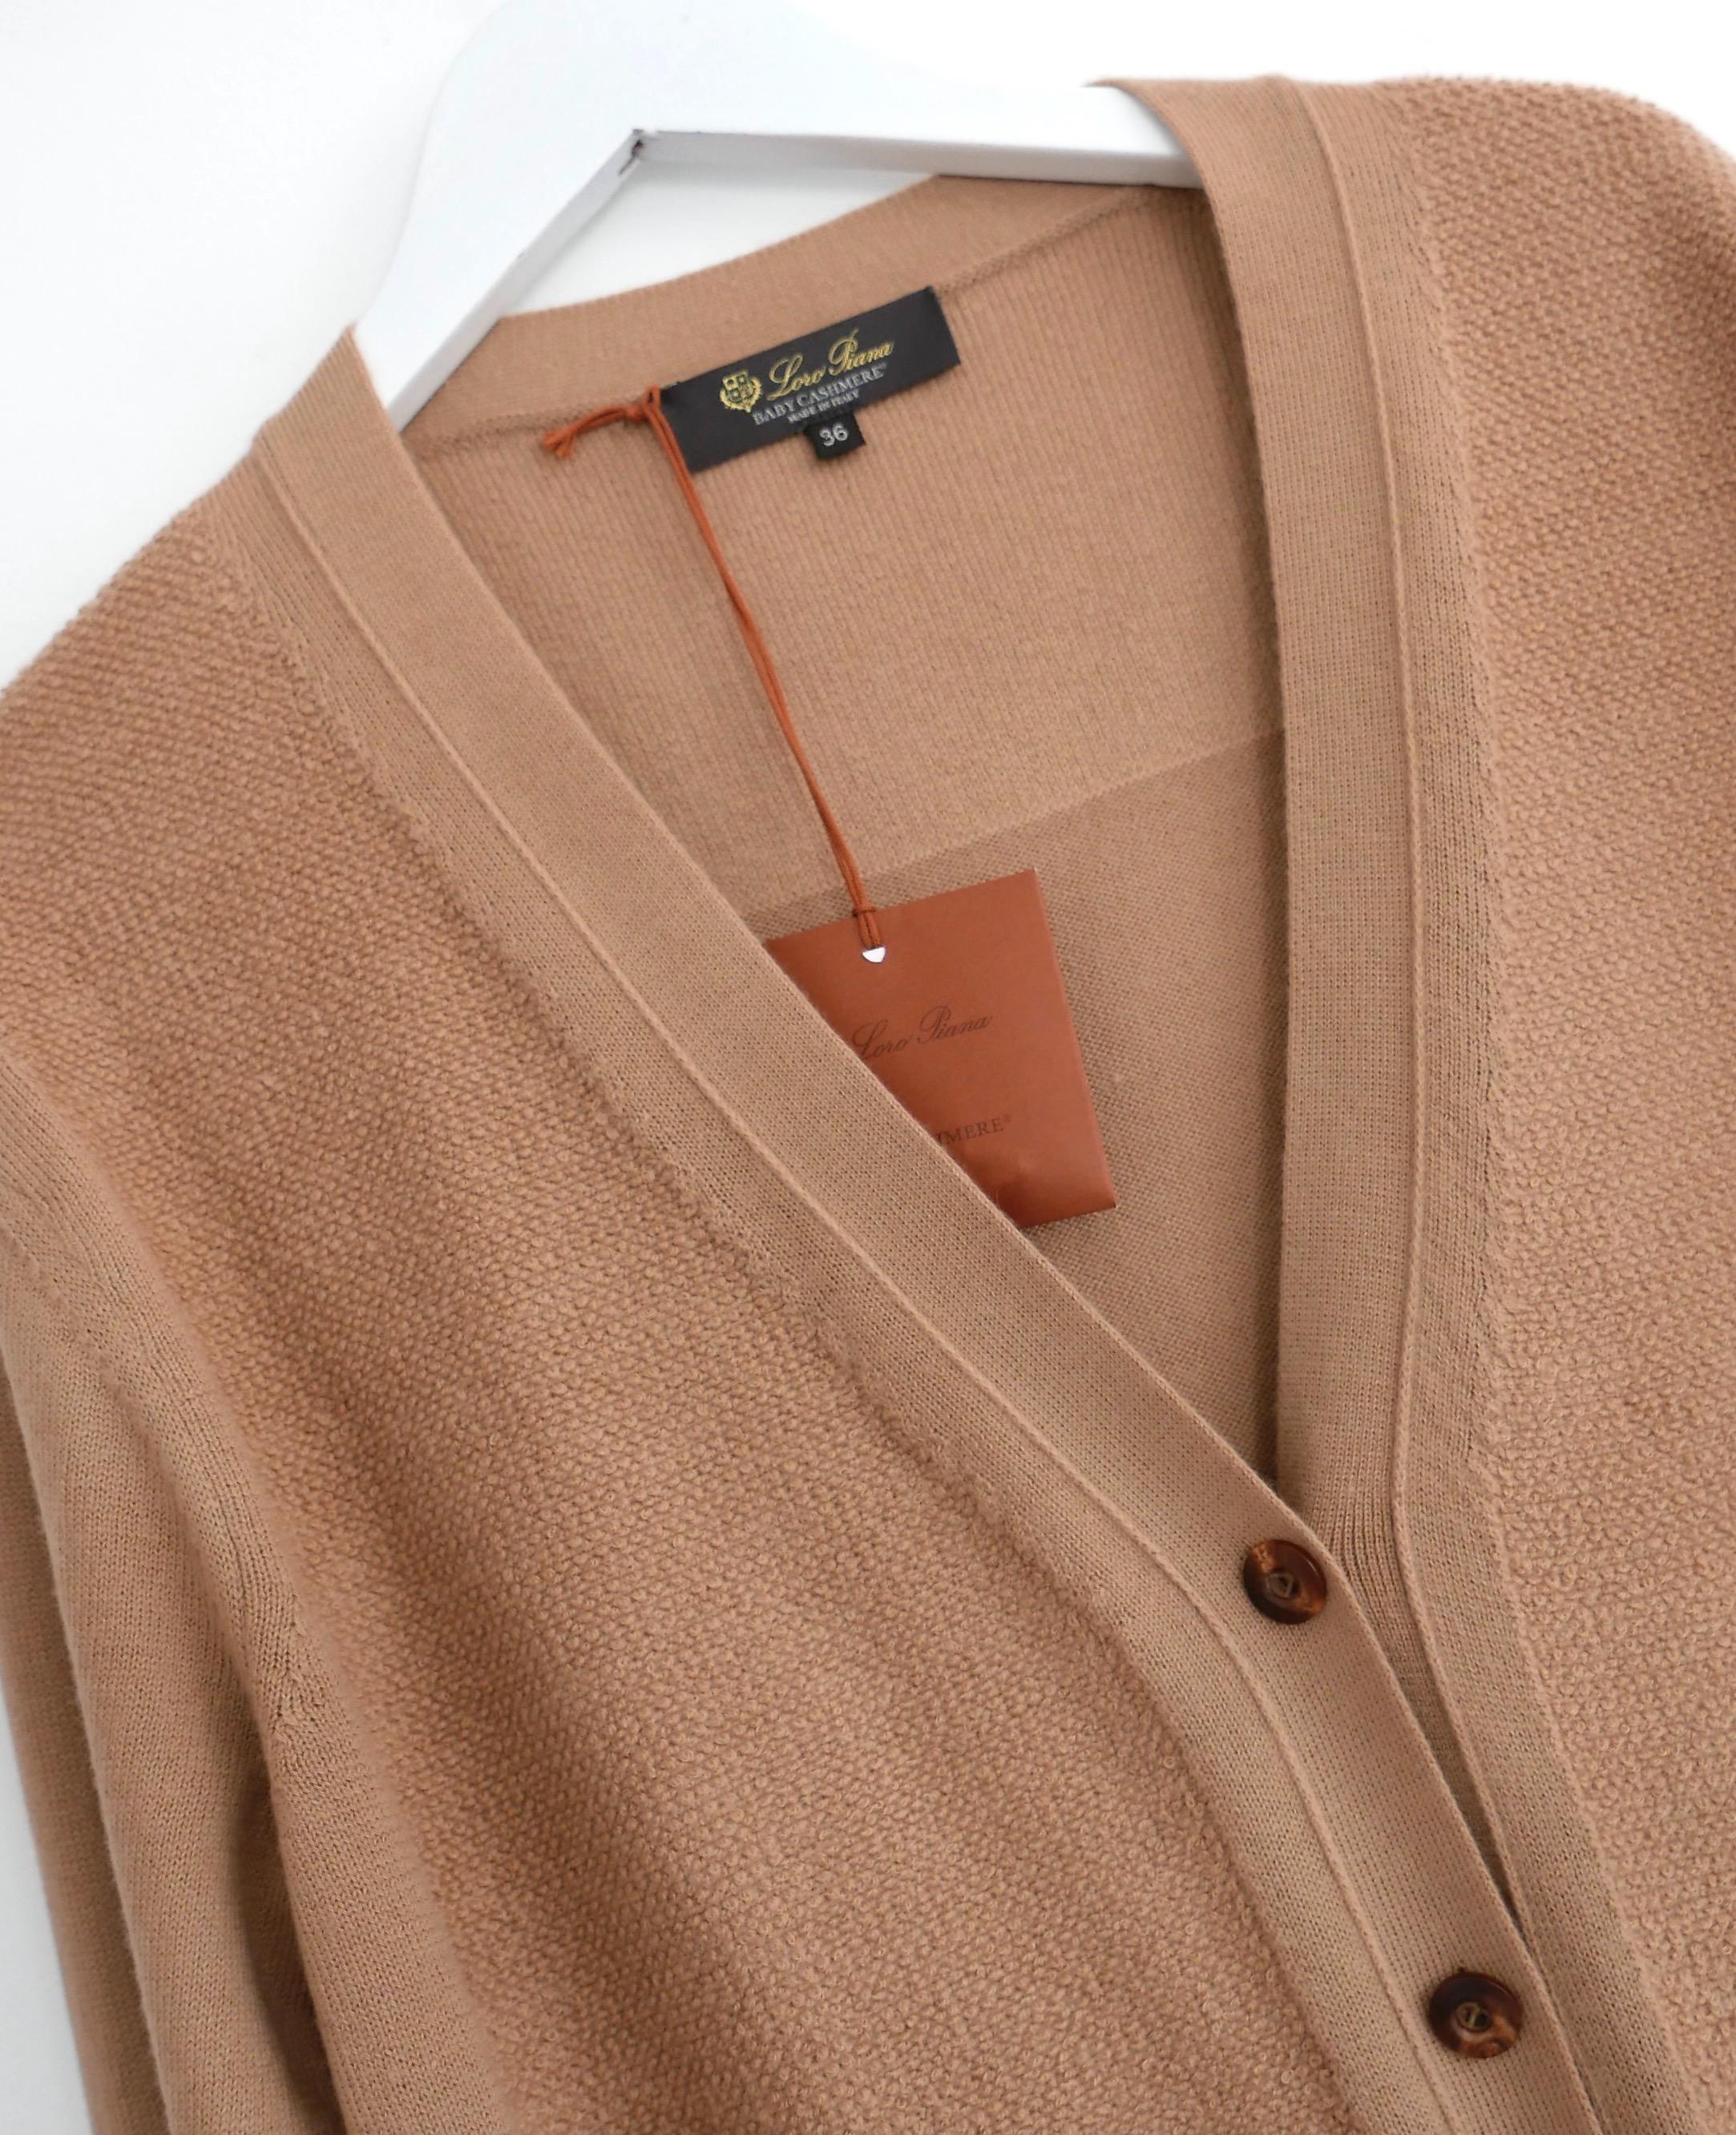 Gorgeous, super luxe Loro Piana Wetherlam baby  cashmere cardigan jacket. Bought for £2250 and new with tag/spare button and yarn. Made from incredibly soft, smooth knit camel brown baby cashmere with super tactile textured front panels and back